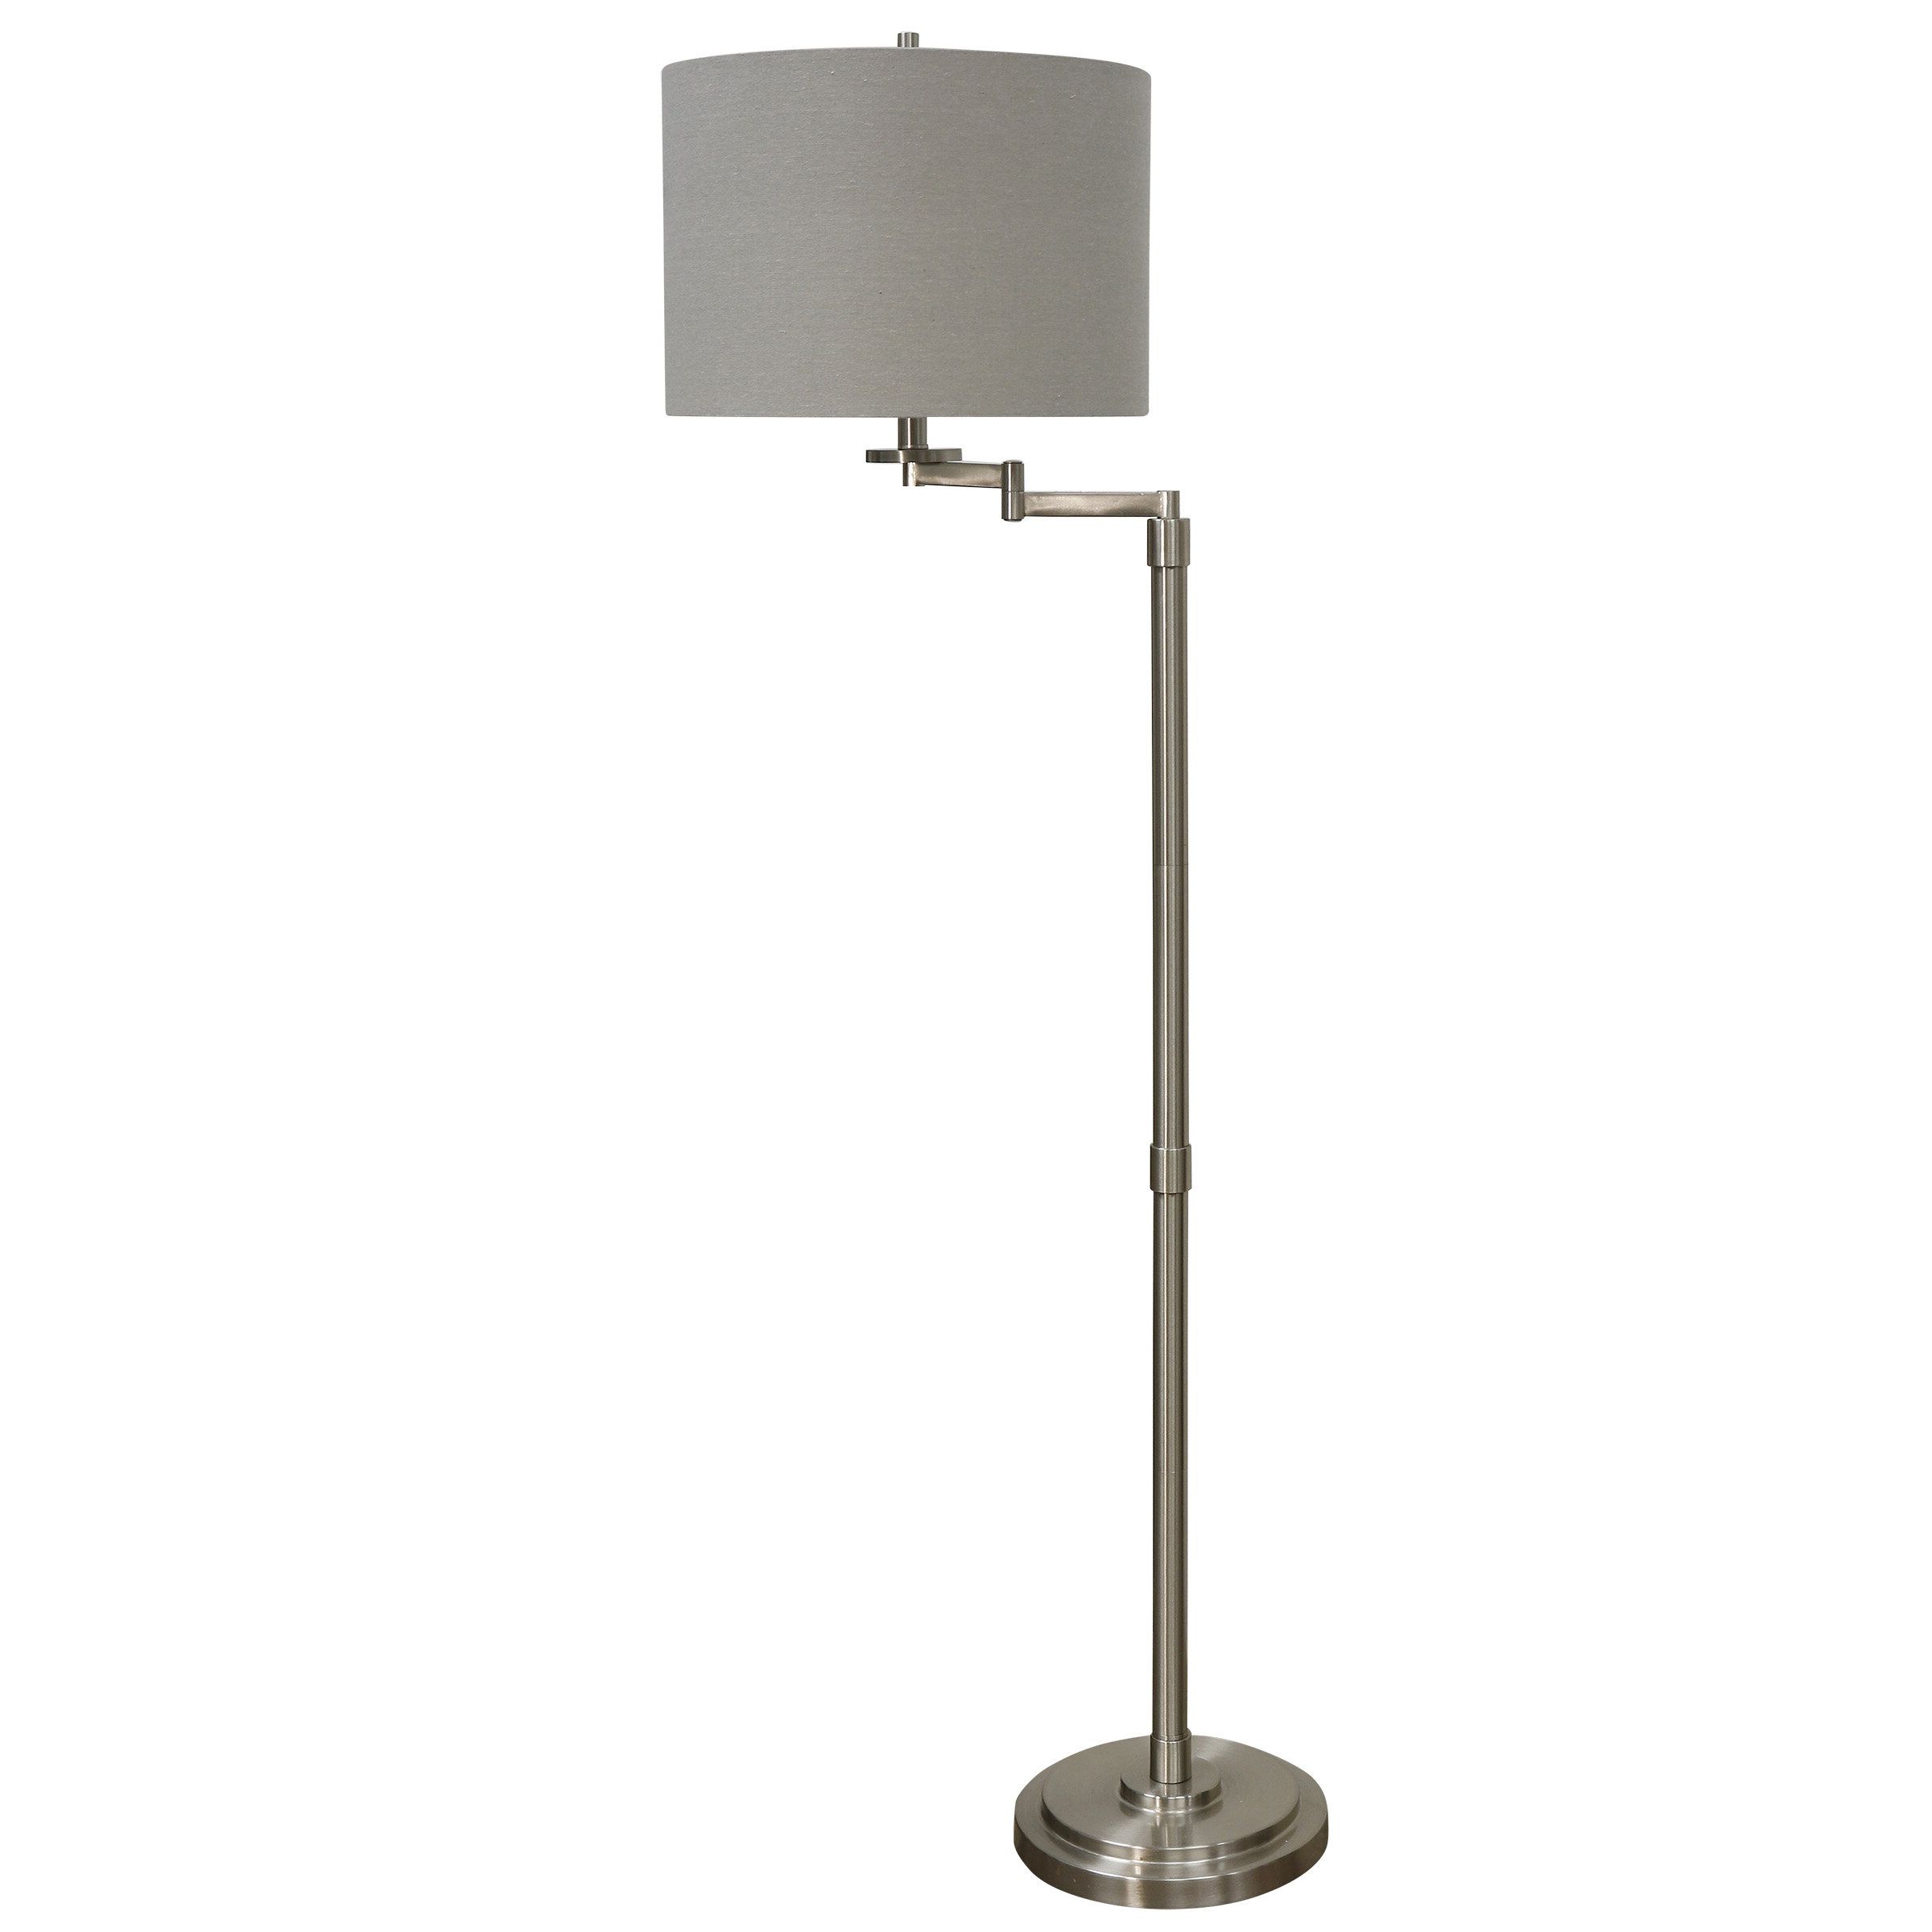 Swing Arm Floor Lamps You'll Love In 2023 Regarding Well Known 59 Inch Floor Lamps (View 8 of 15)